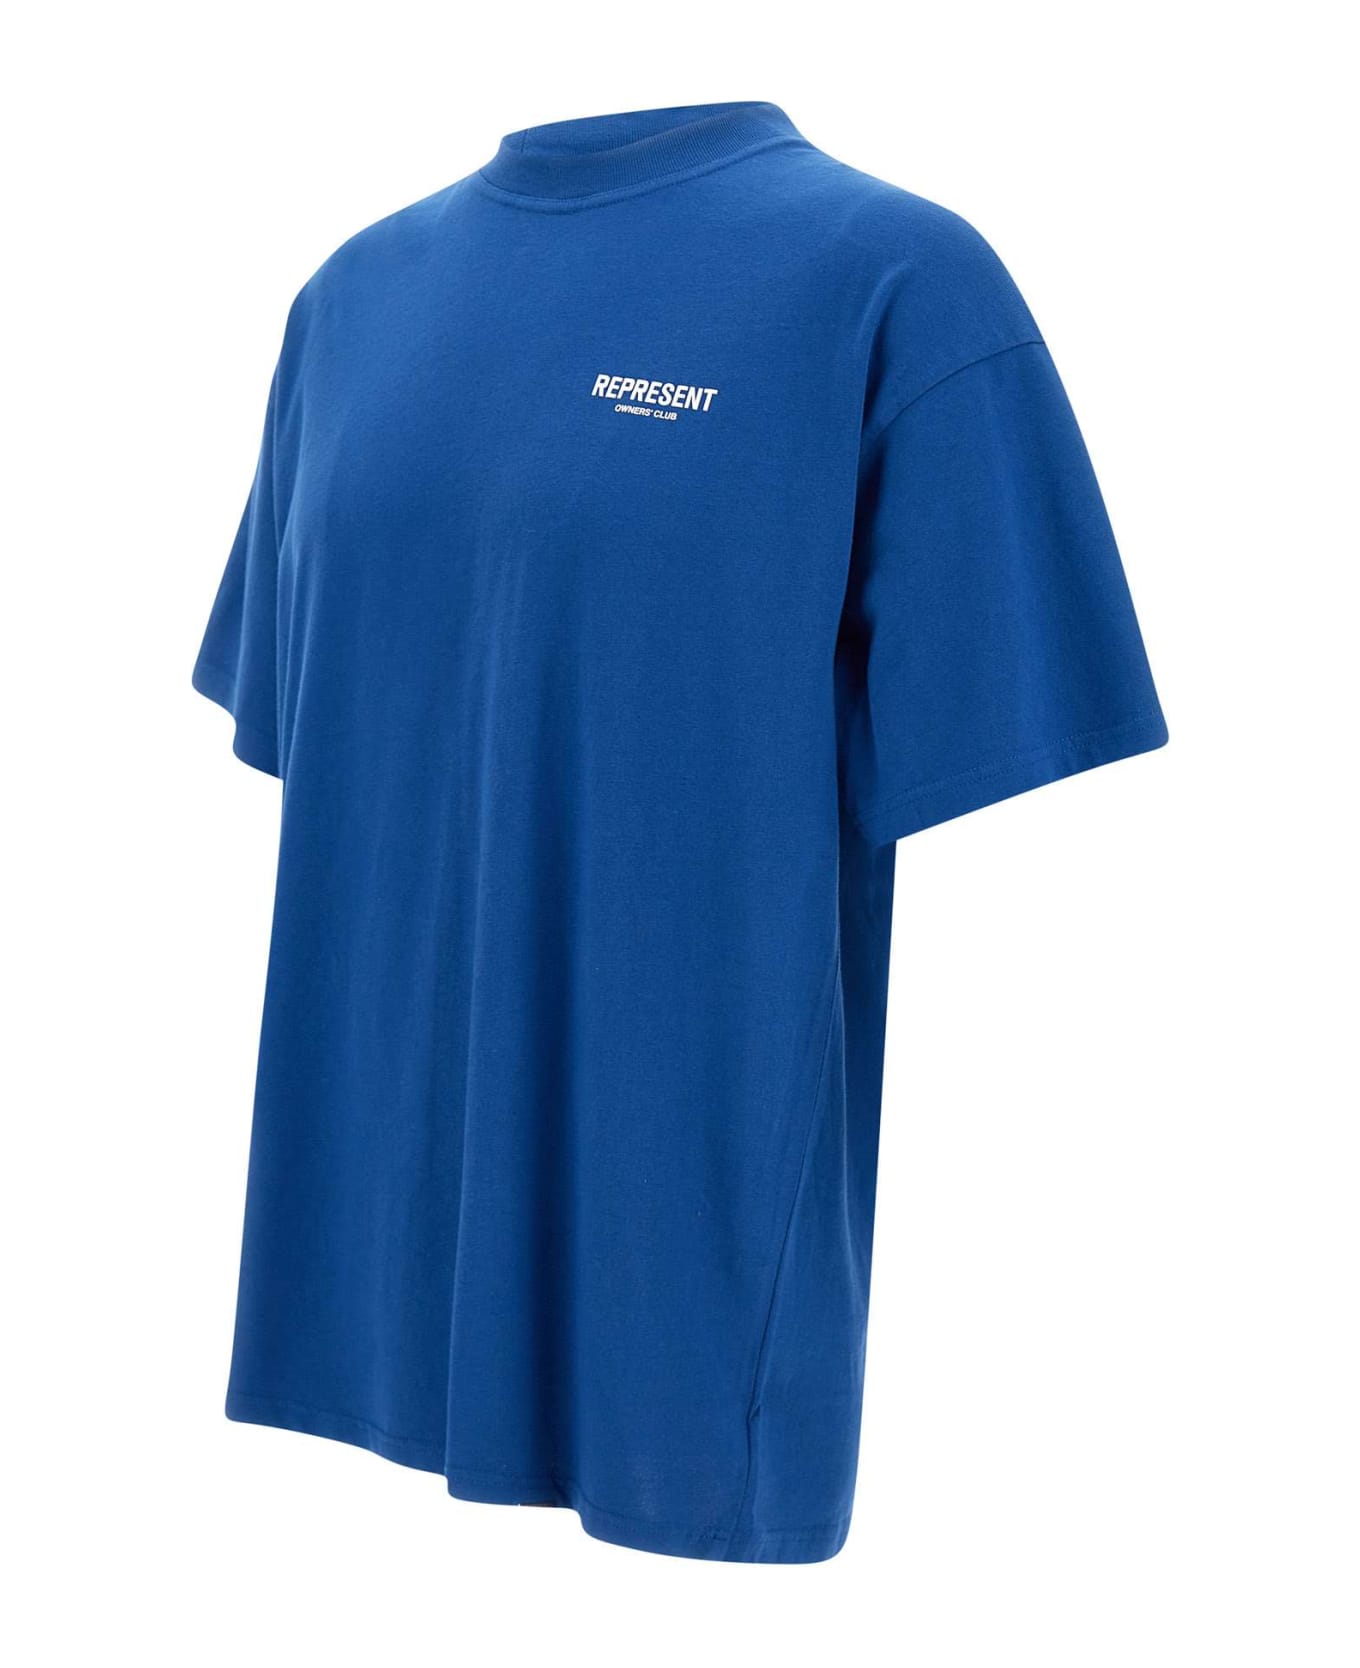 REPRESENT "owners Club" Cotton T-shirt - BLUE